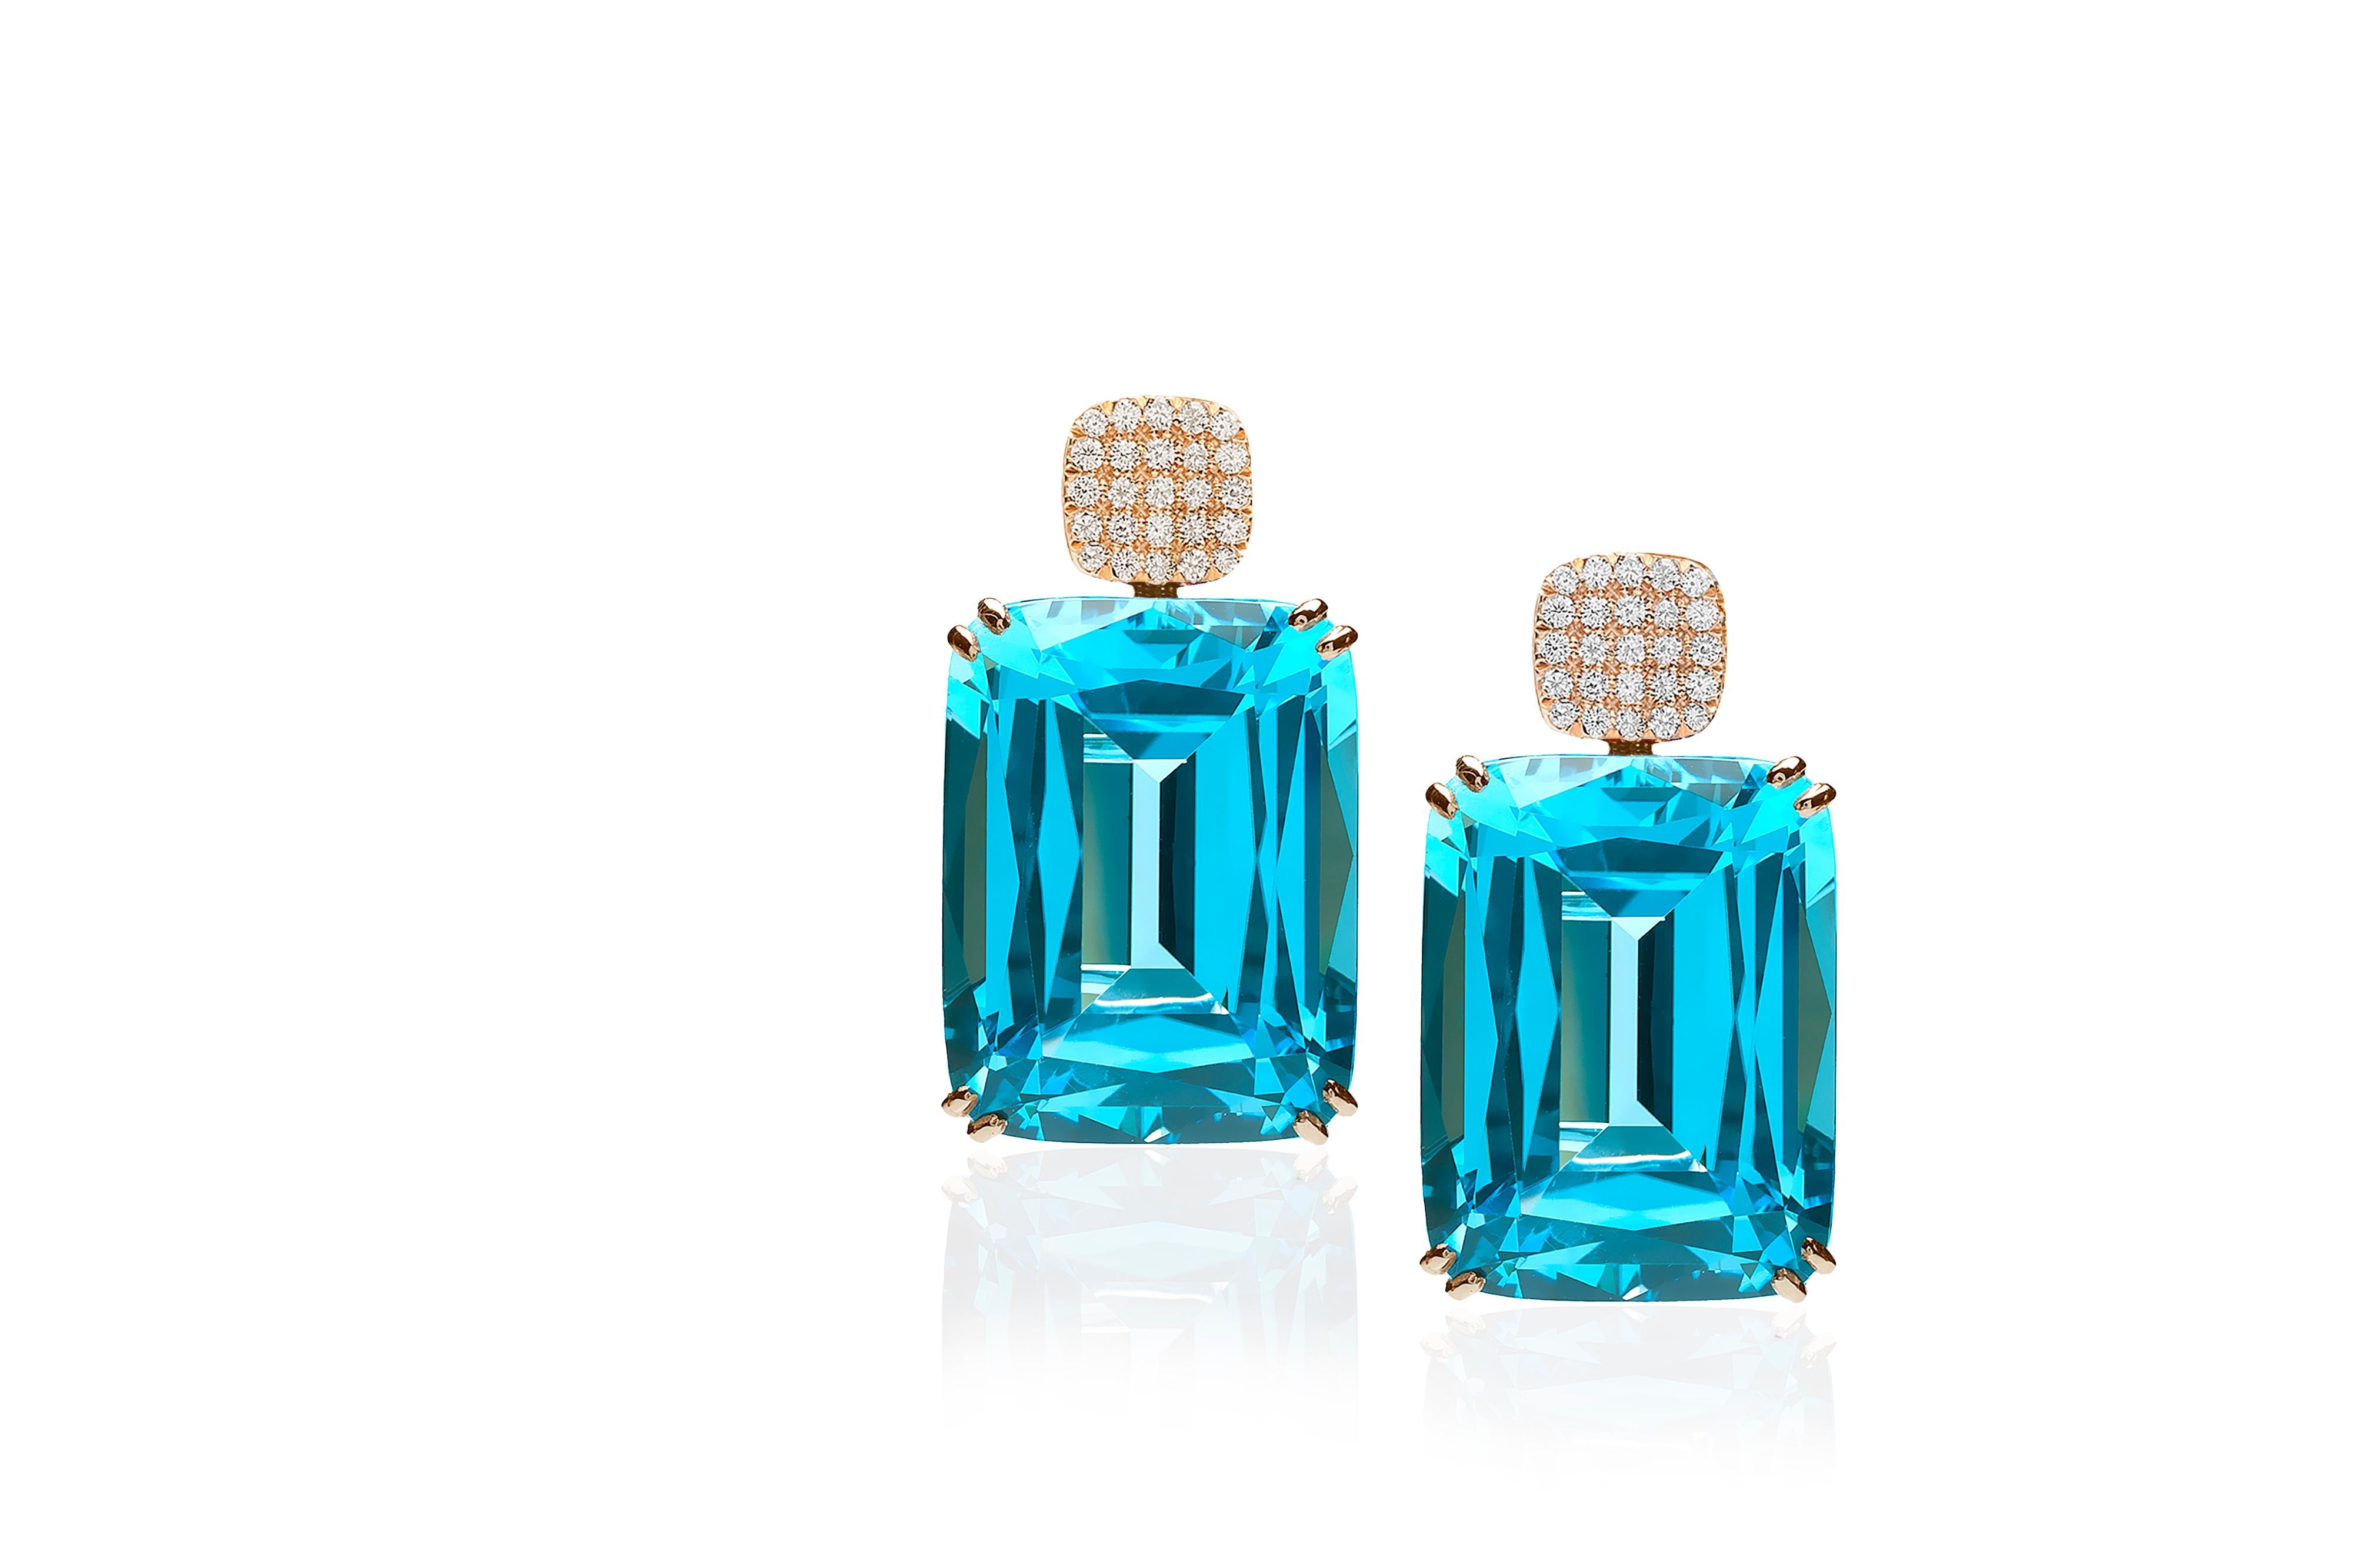 Blue Topaz Cushion Earrings with Diamonds Motif in 18K Yellow Gold, from ‘Gossip’ Collection

Stone Size 20 X 15mm 

Gemstone Approx. Wt: Blue Topaz- 46.07 Carats 

Diamonds: G-H / VS, Approx. Wt: 0.36 Carats